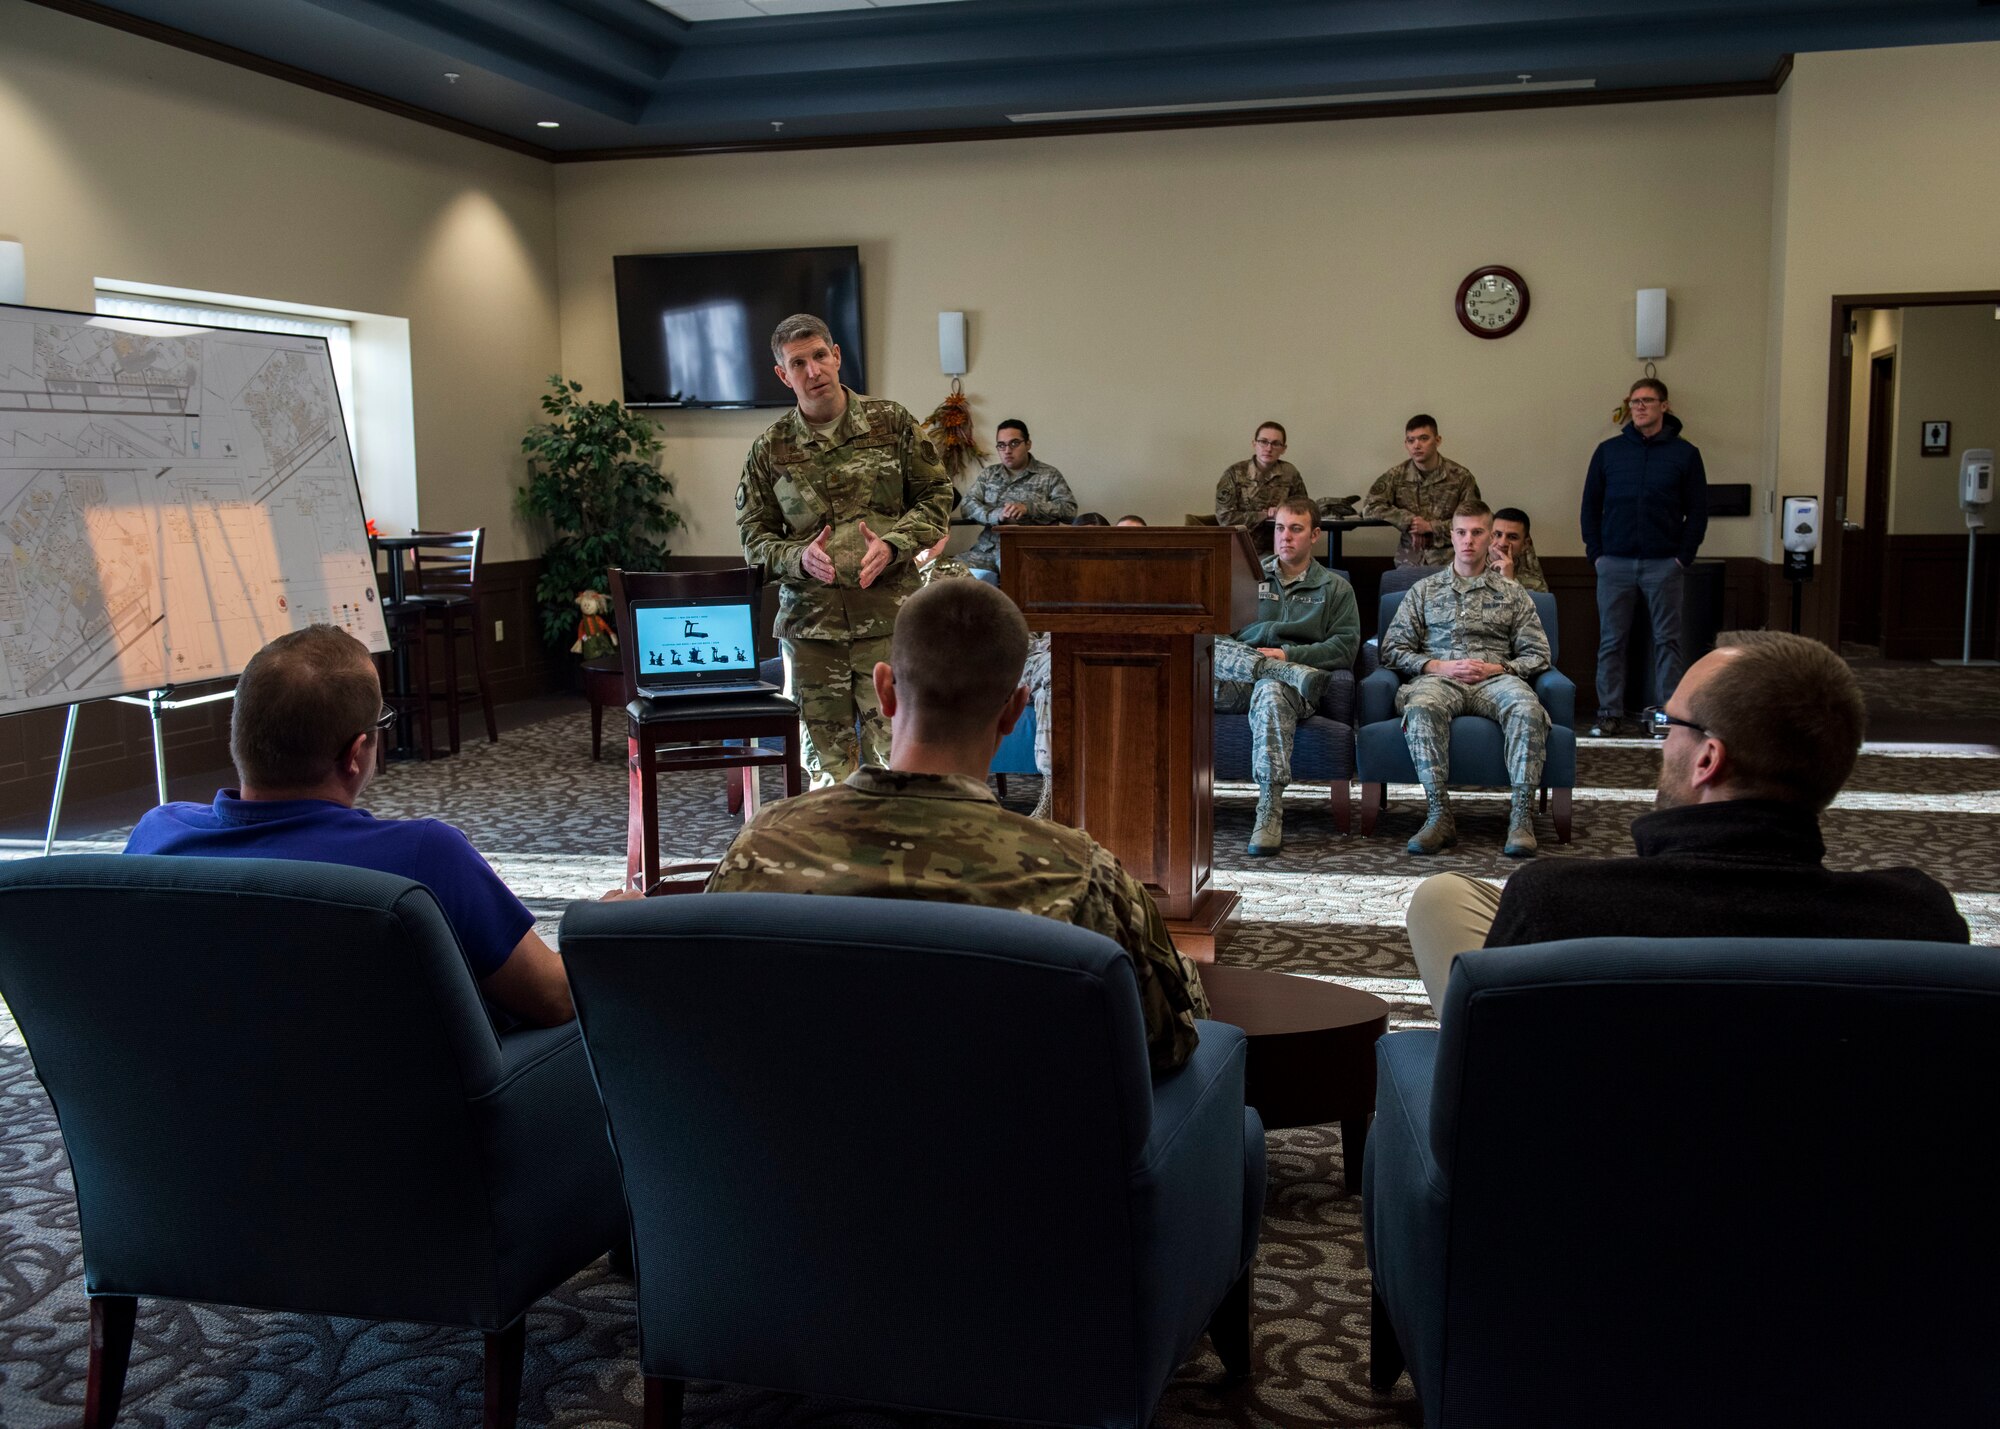 U.S. Air Force Maj. Charles Parsons, 141st Communication Squadron flight commander, pitches his idea to judges at the Energy Spark Tank forum held by the 92nd Civil Engineer Squadron at Fairchild Air Force Base, Washington, Oct. 29, 2019. Airmen from units across Fairchild participated in the forum, where they each pitched innovative ideas to a panel that consisted of 92nd CES leadership, energy management and environmental office representatives who play a critical role in implementing energy conservation actions. (U.S. Air Force photo by Airman 1st Class Lawrence Sena)